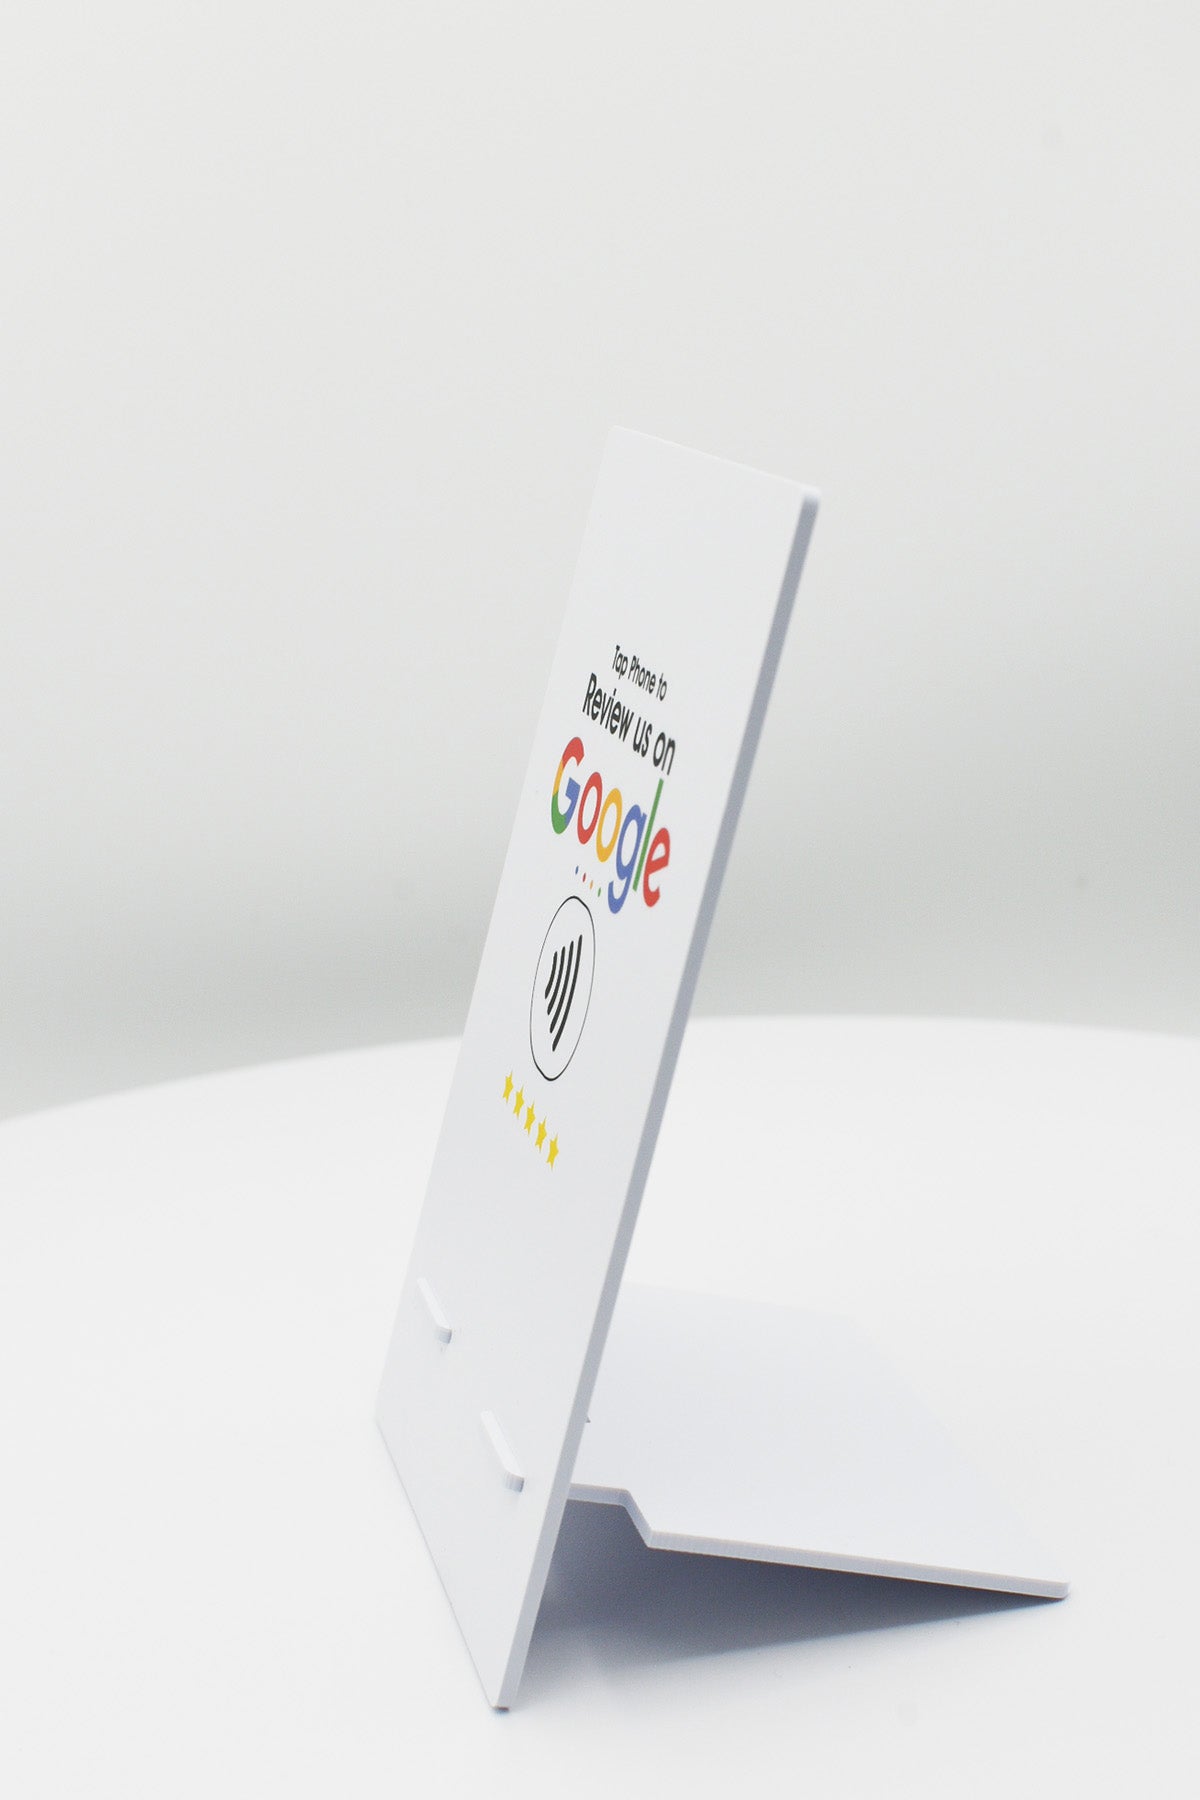 Google Review NFC Table Stand